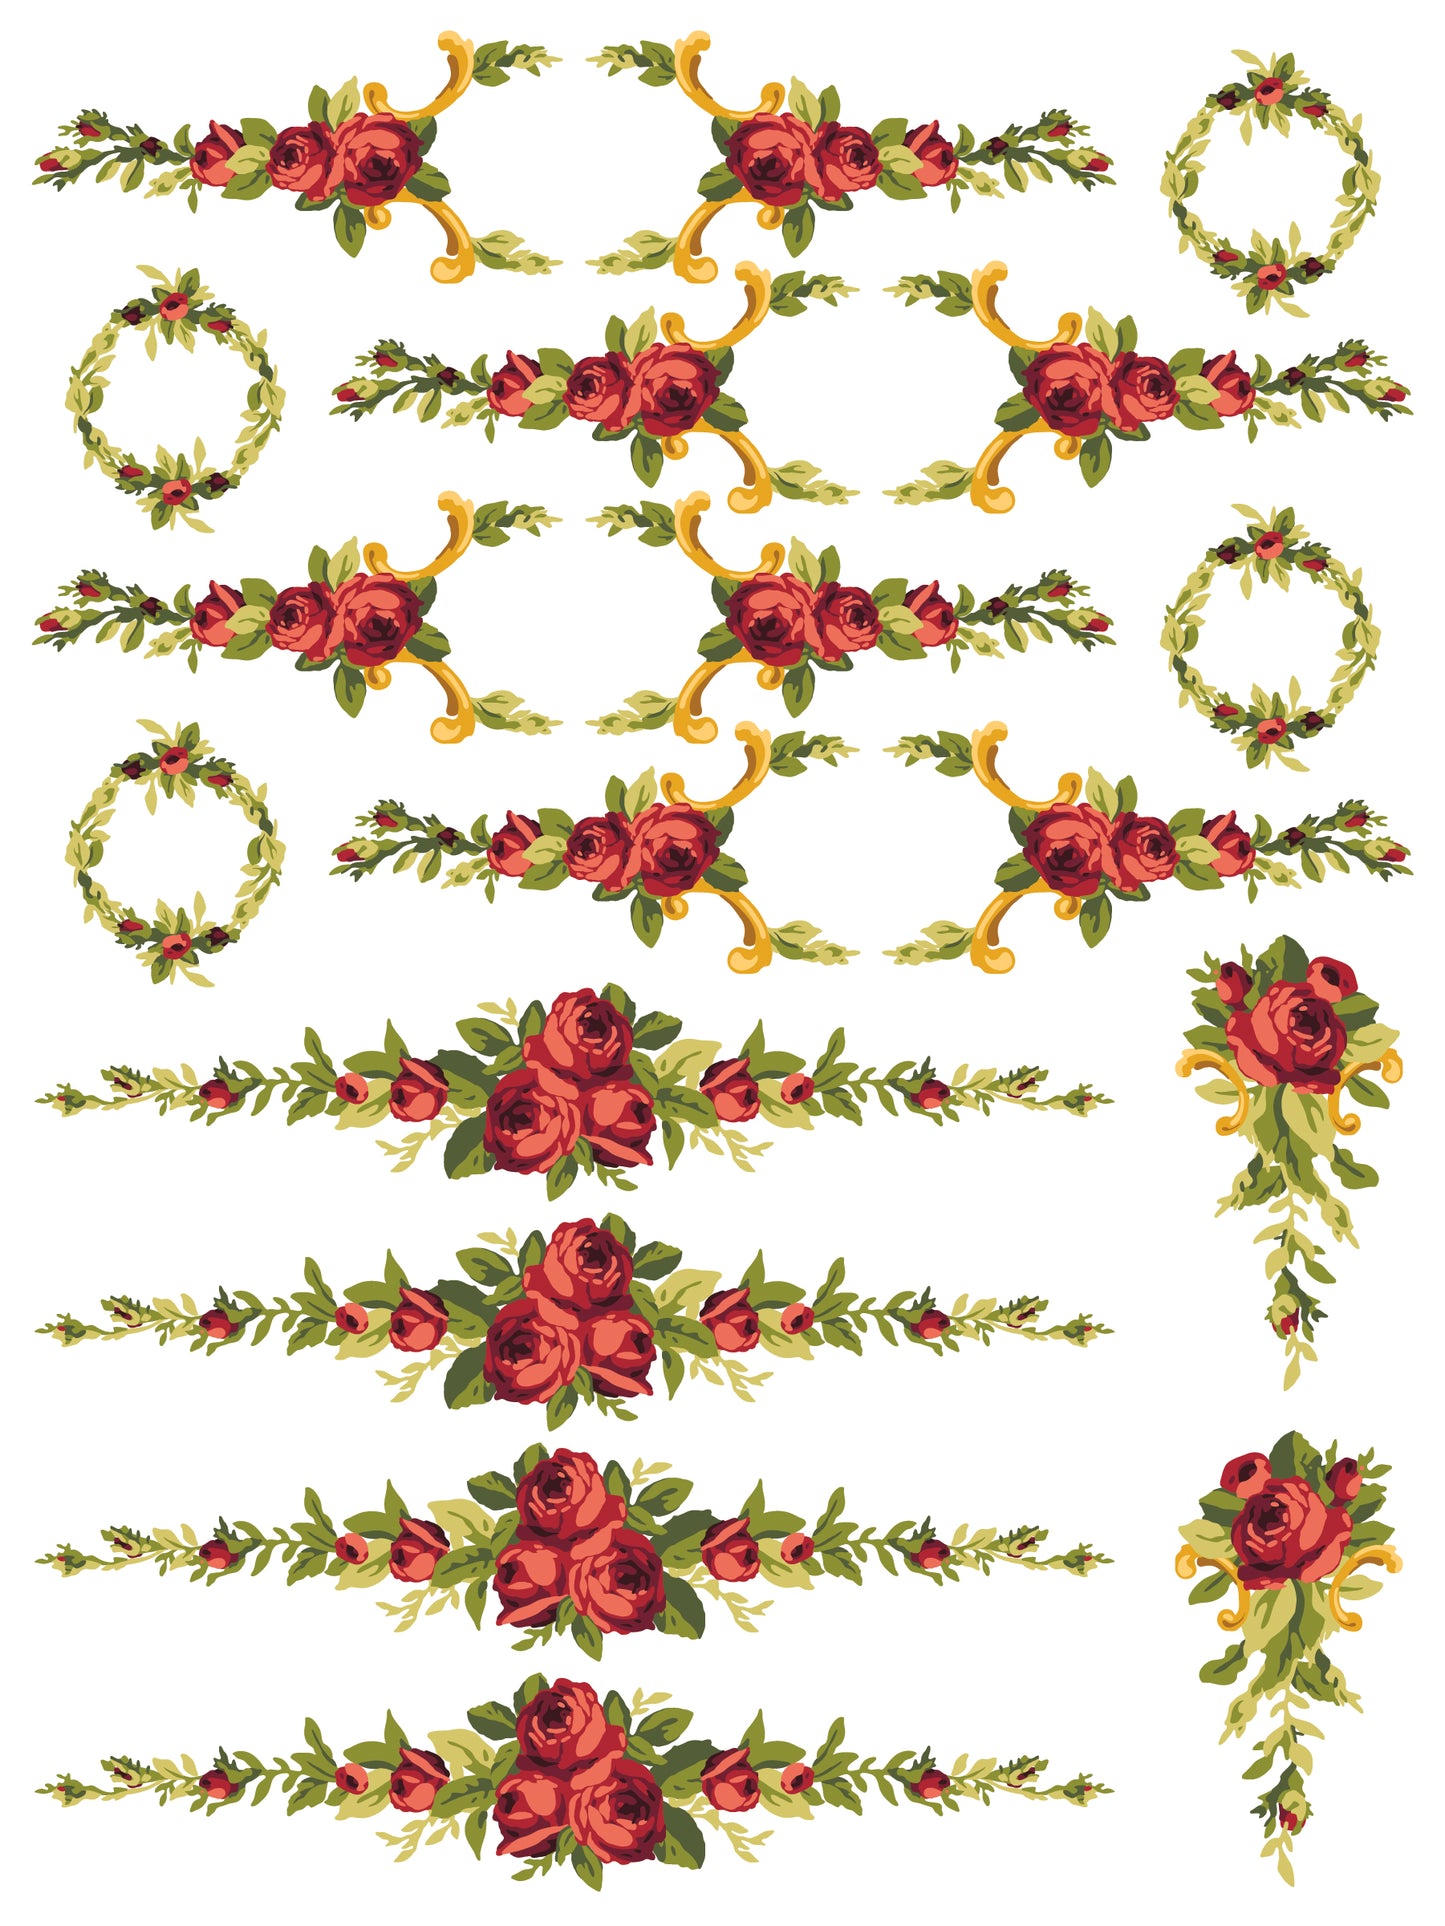 PETITE FLEUR RED IOD PAINT INLAY (12″X16″ PAD-4 SHEETS ) LIMITED EDITION